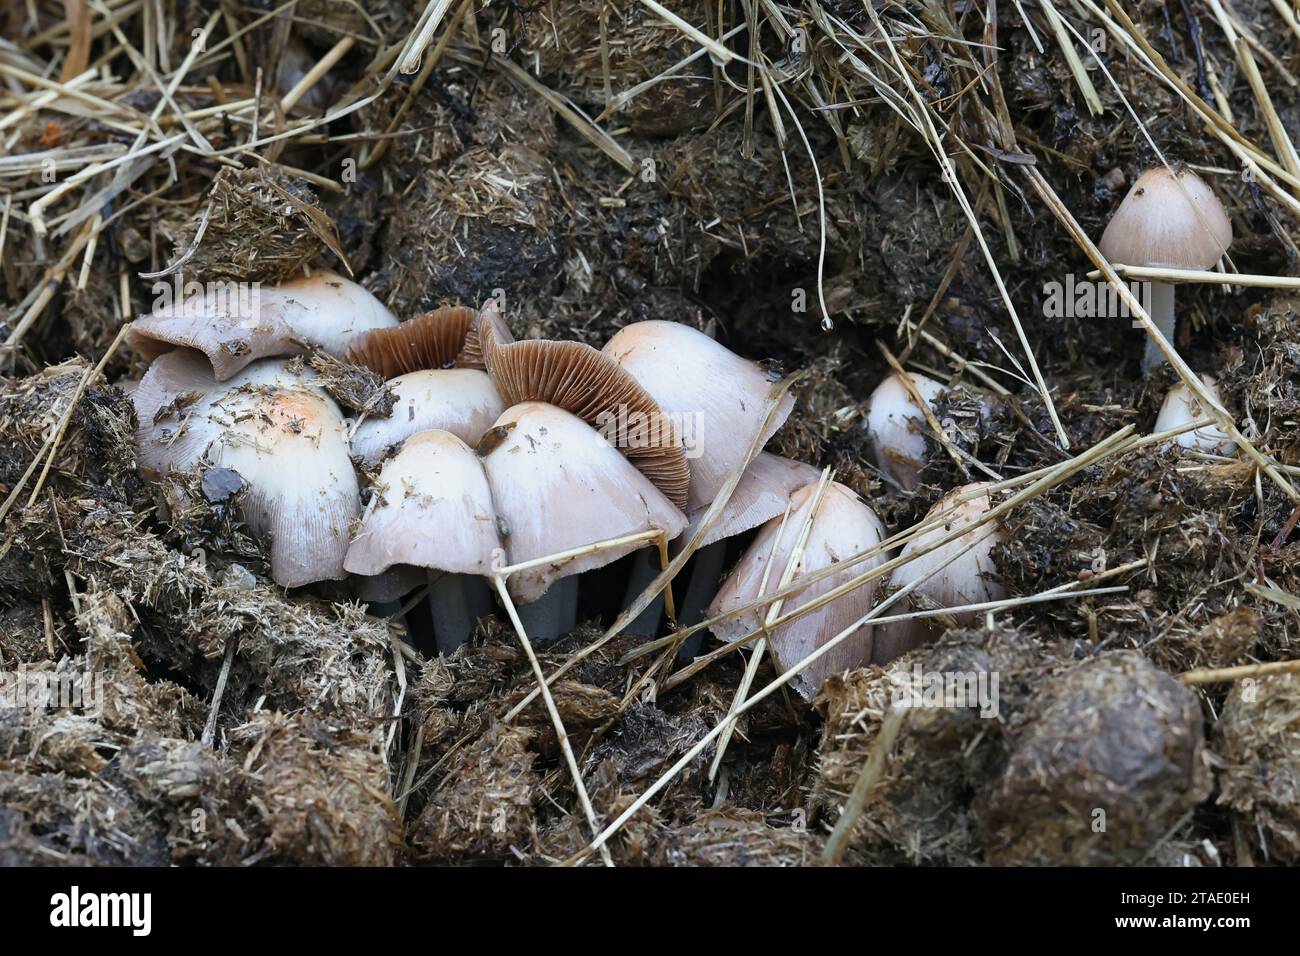 Bolbitius coprophilus, a fieldcap mushroom growing on horse manure in Finland, no common English name Stock Photo